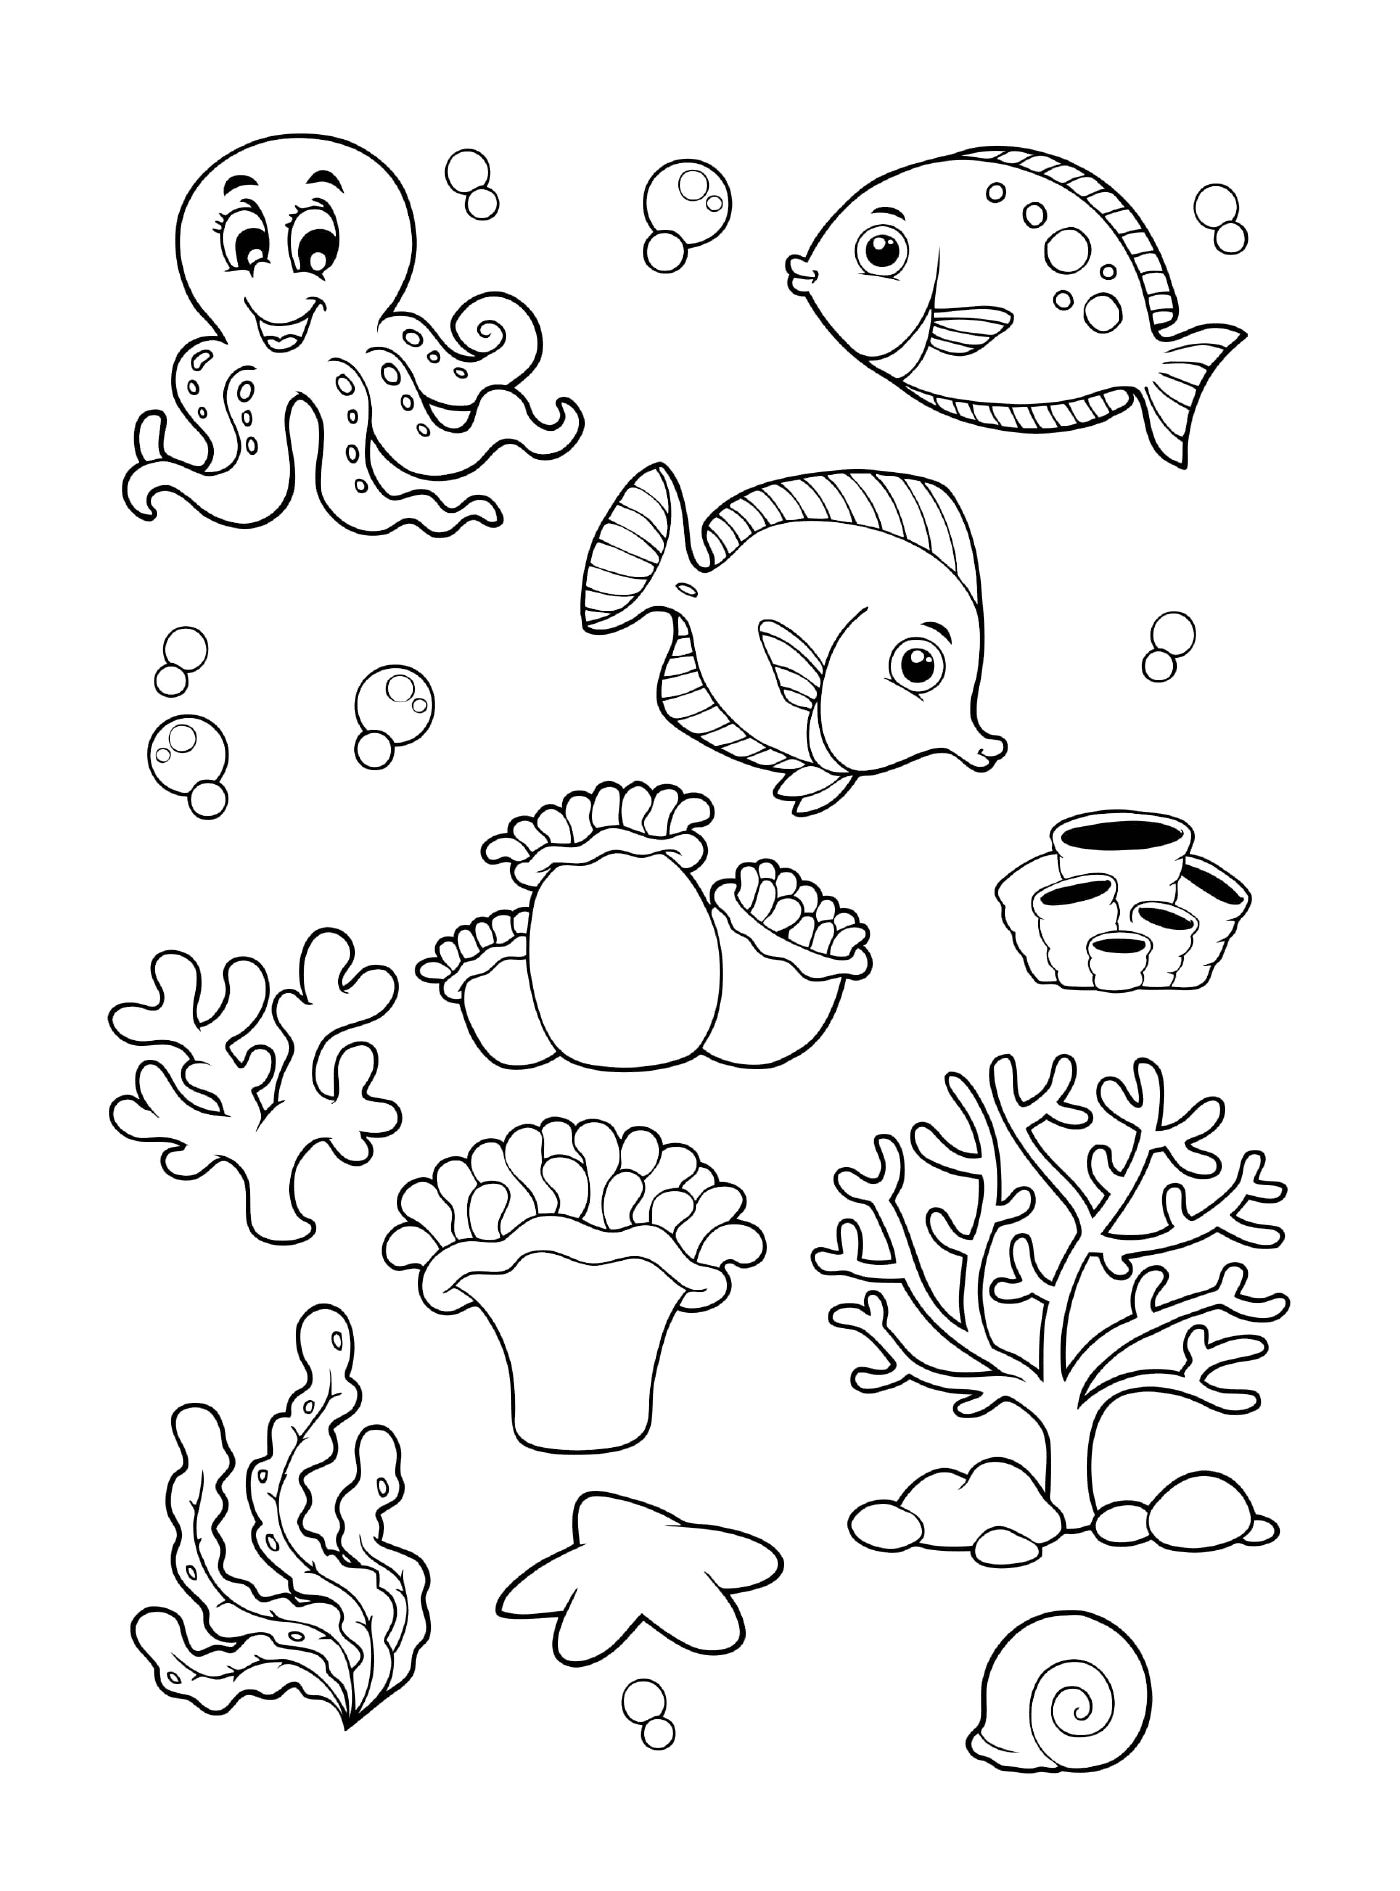  A collection of marine animals for children 